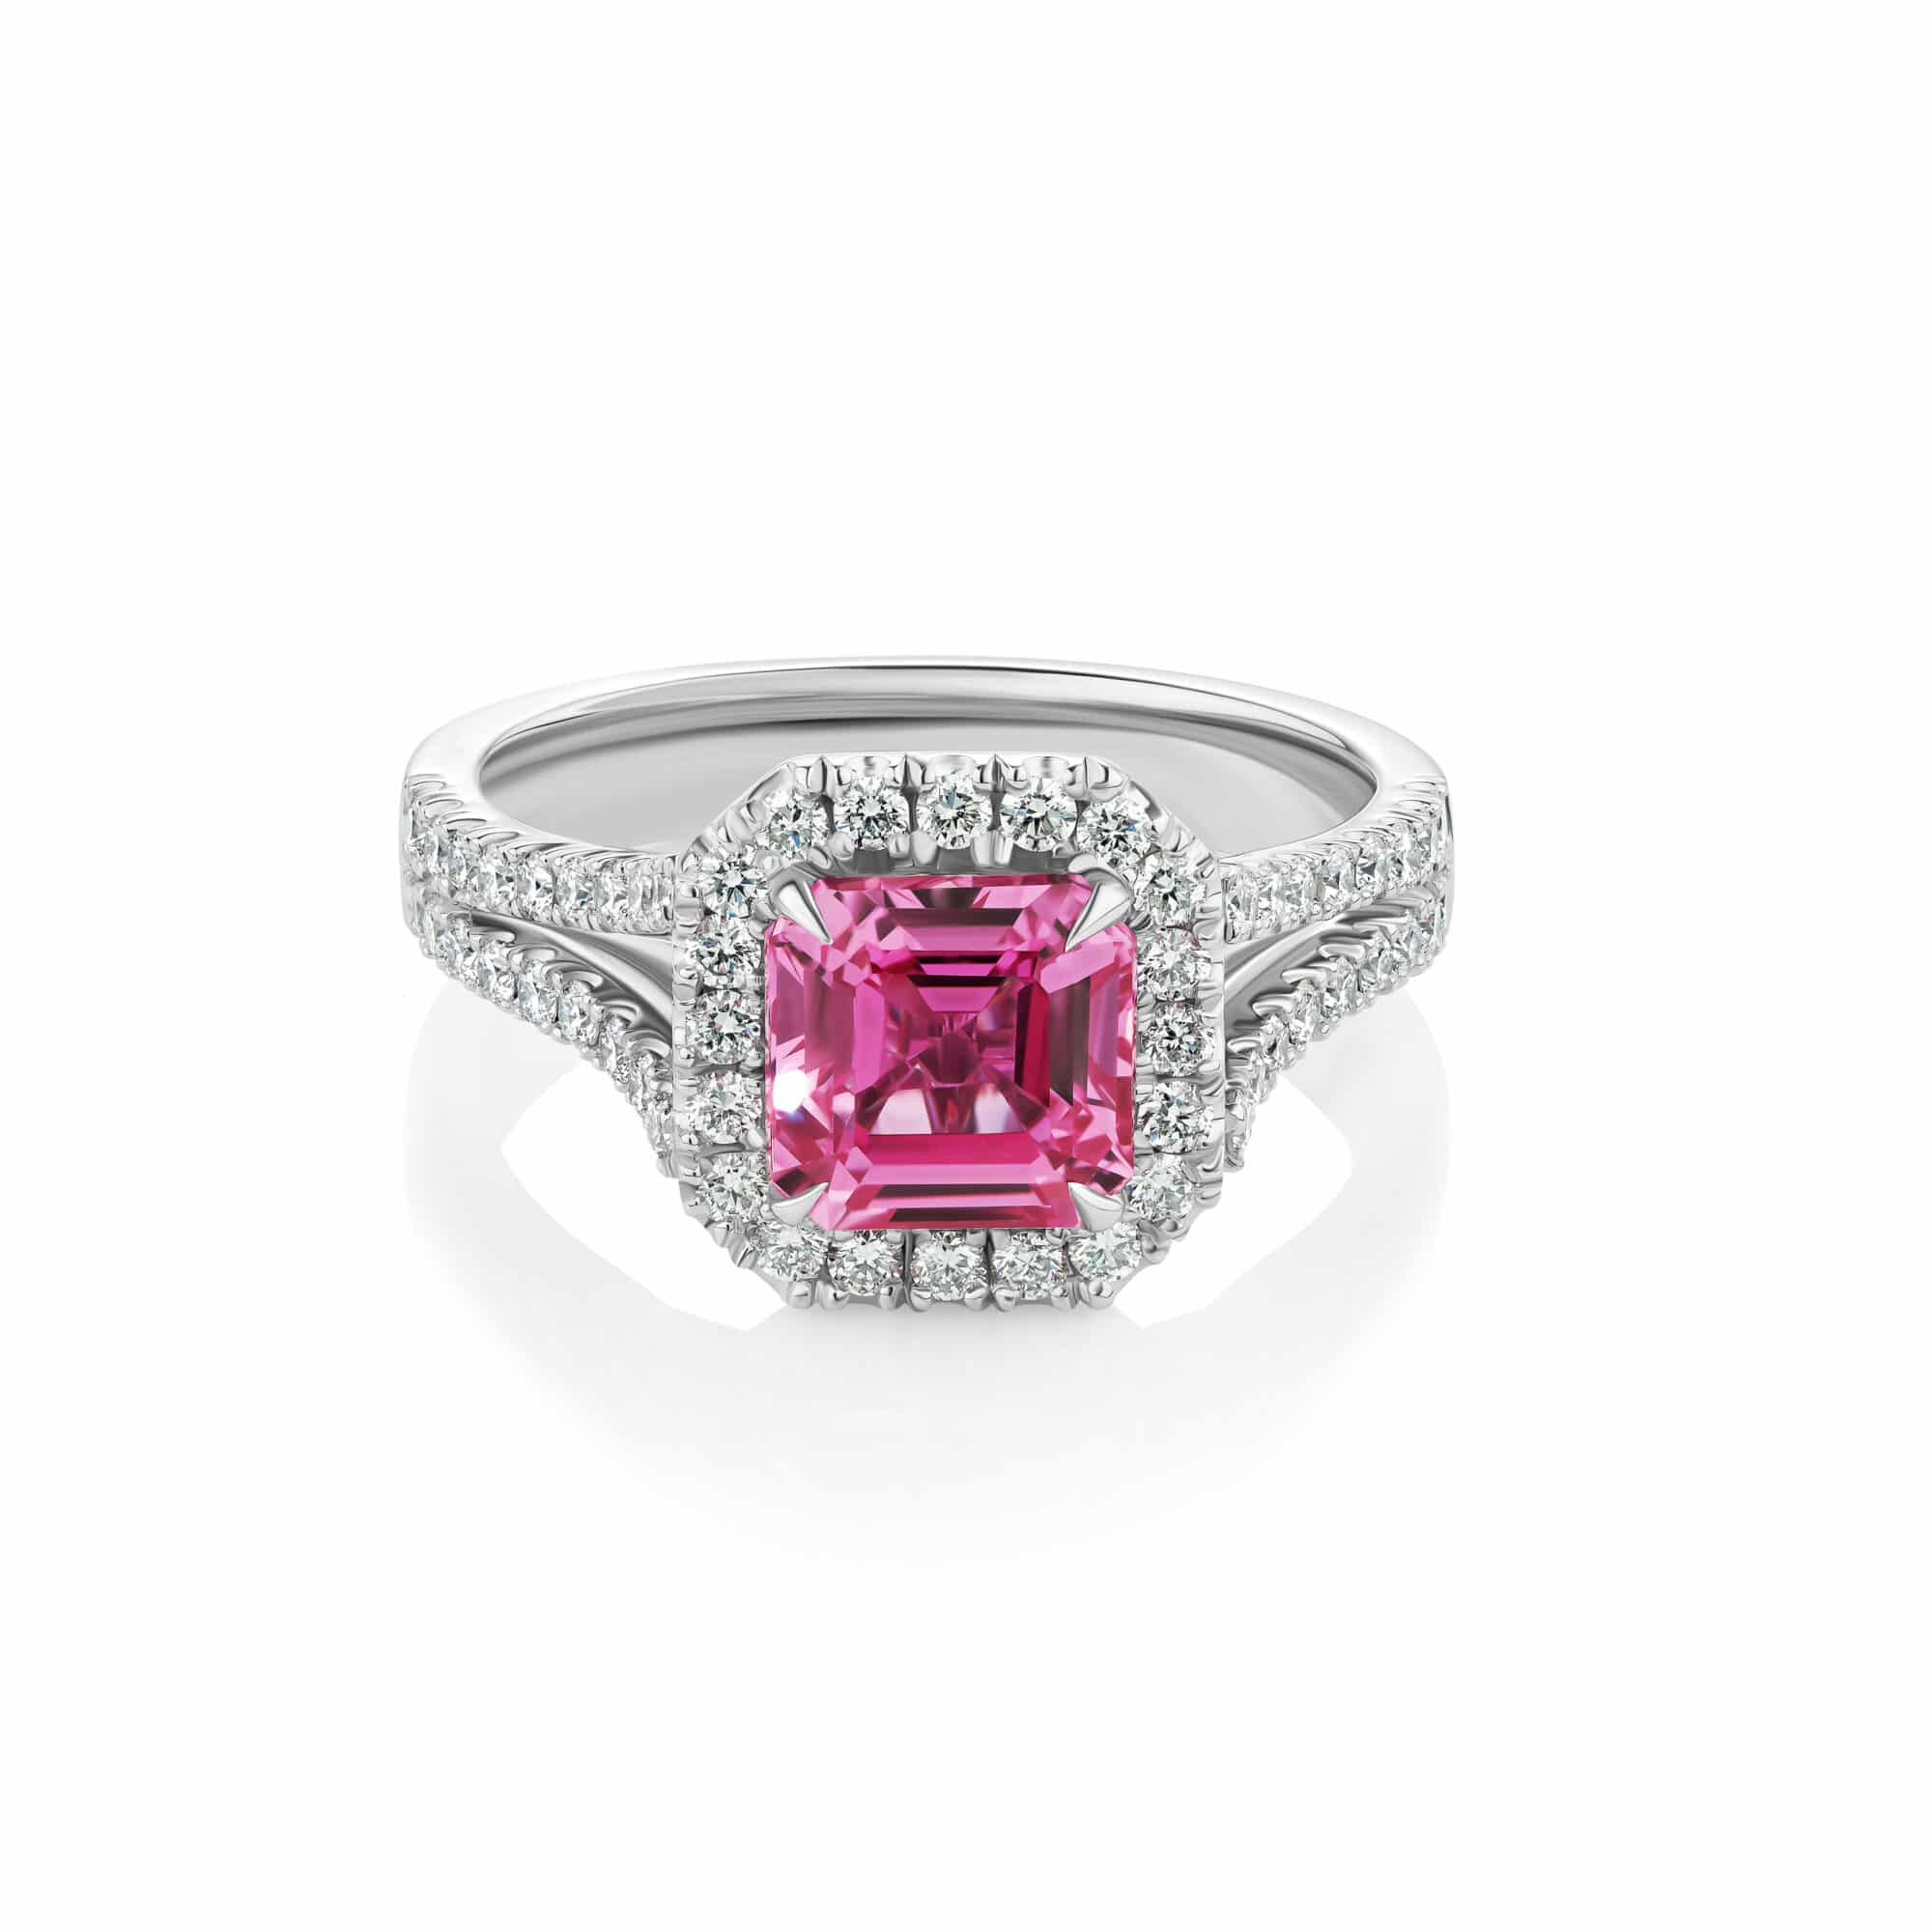 Swainsona Pink Sapphire Emerald Cut with Diamond Halo front